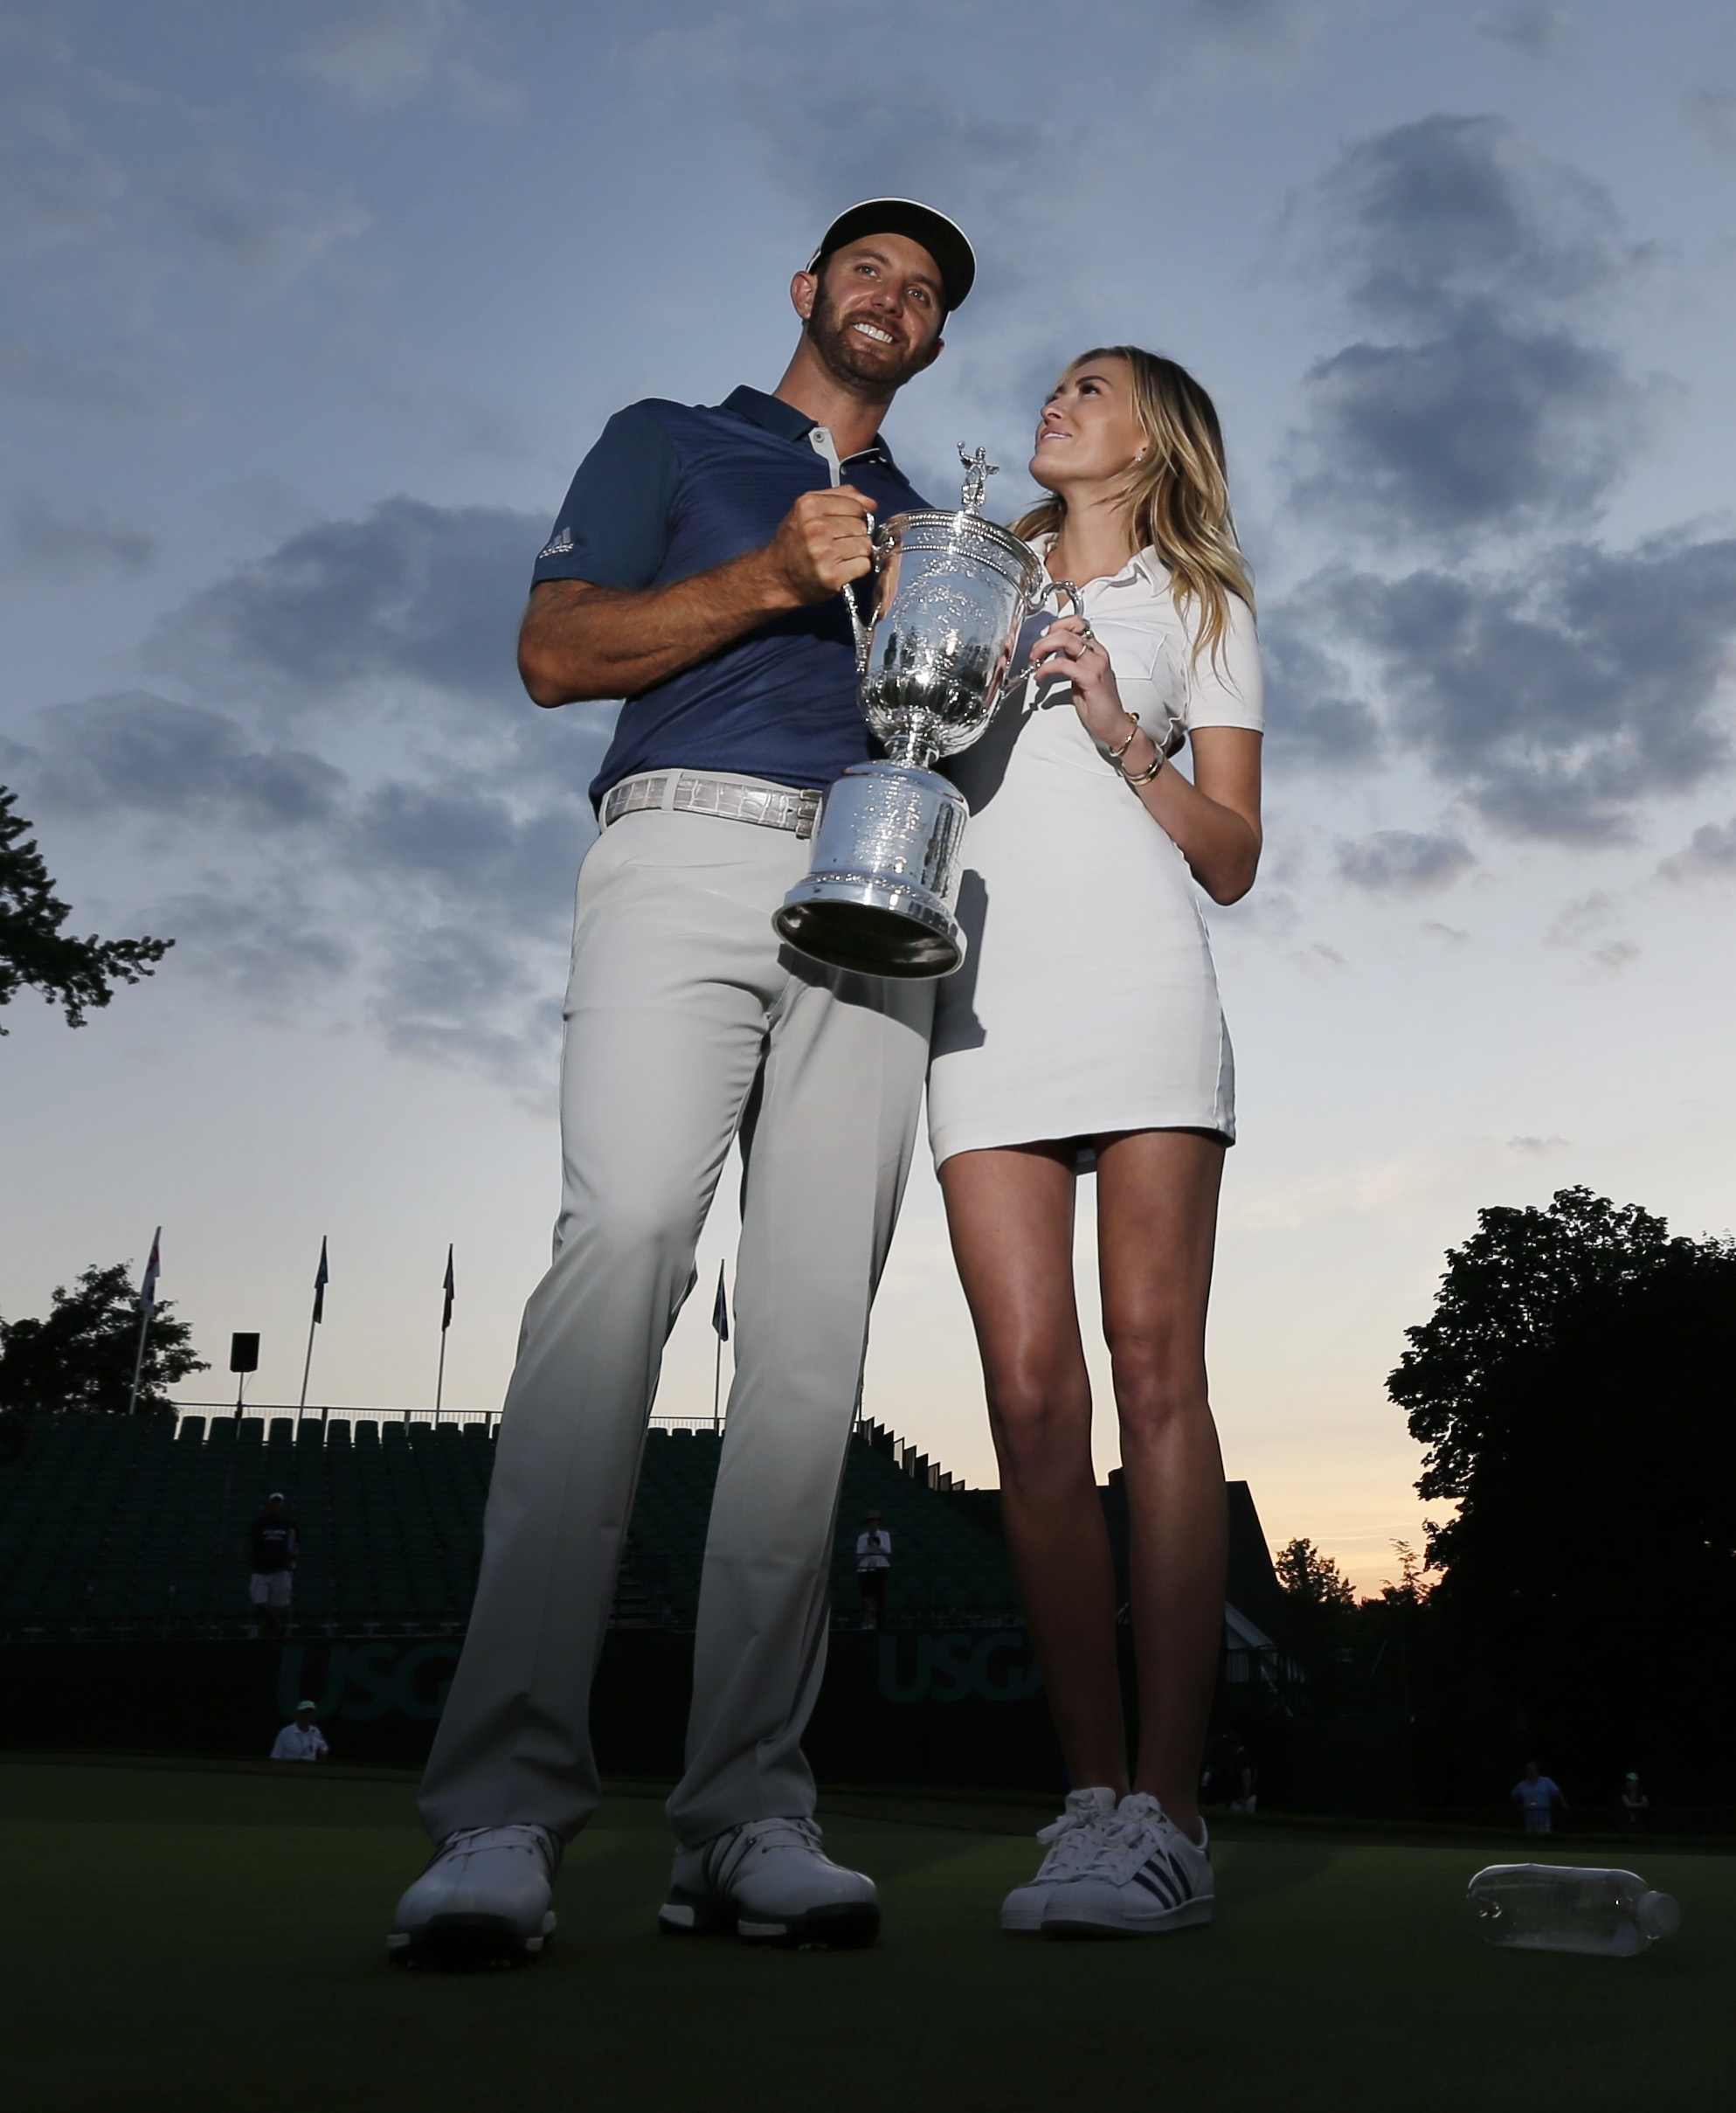 Dustin Johnson's Life Journey Has Not Been That Easy